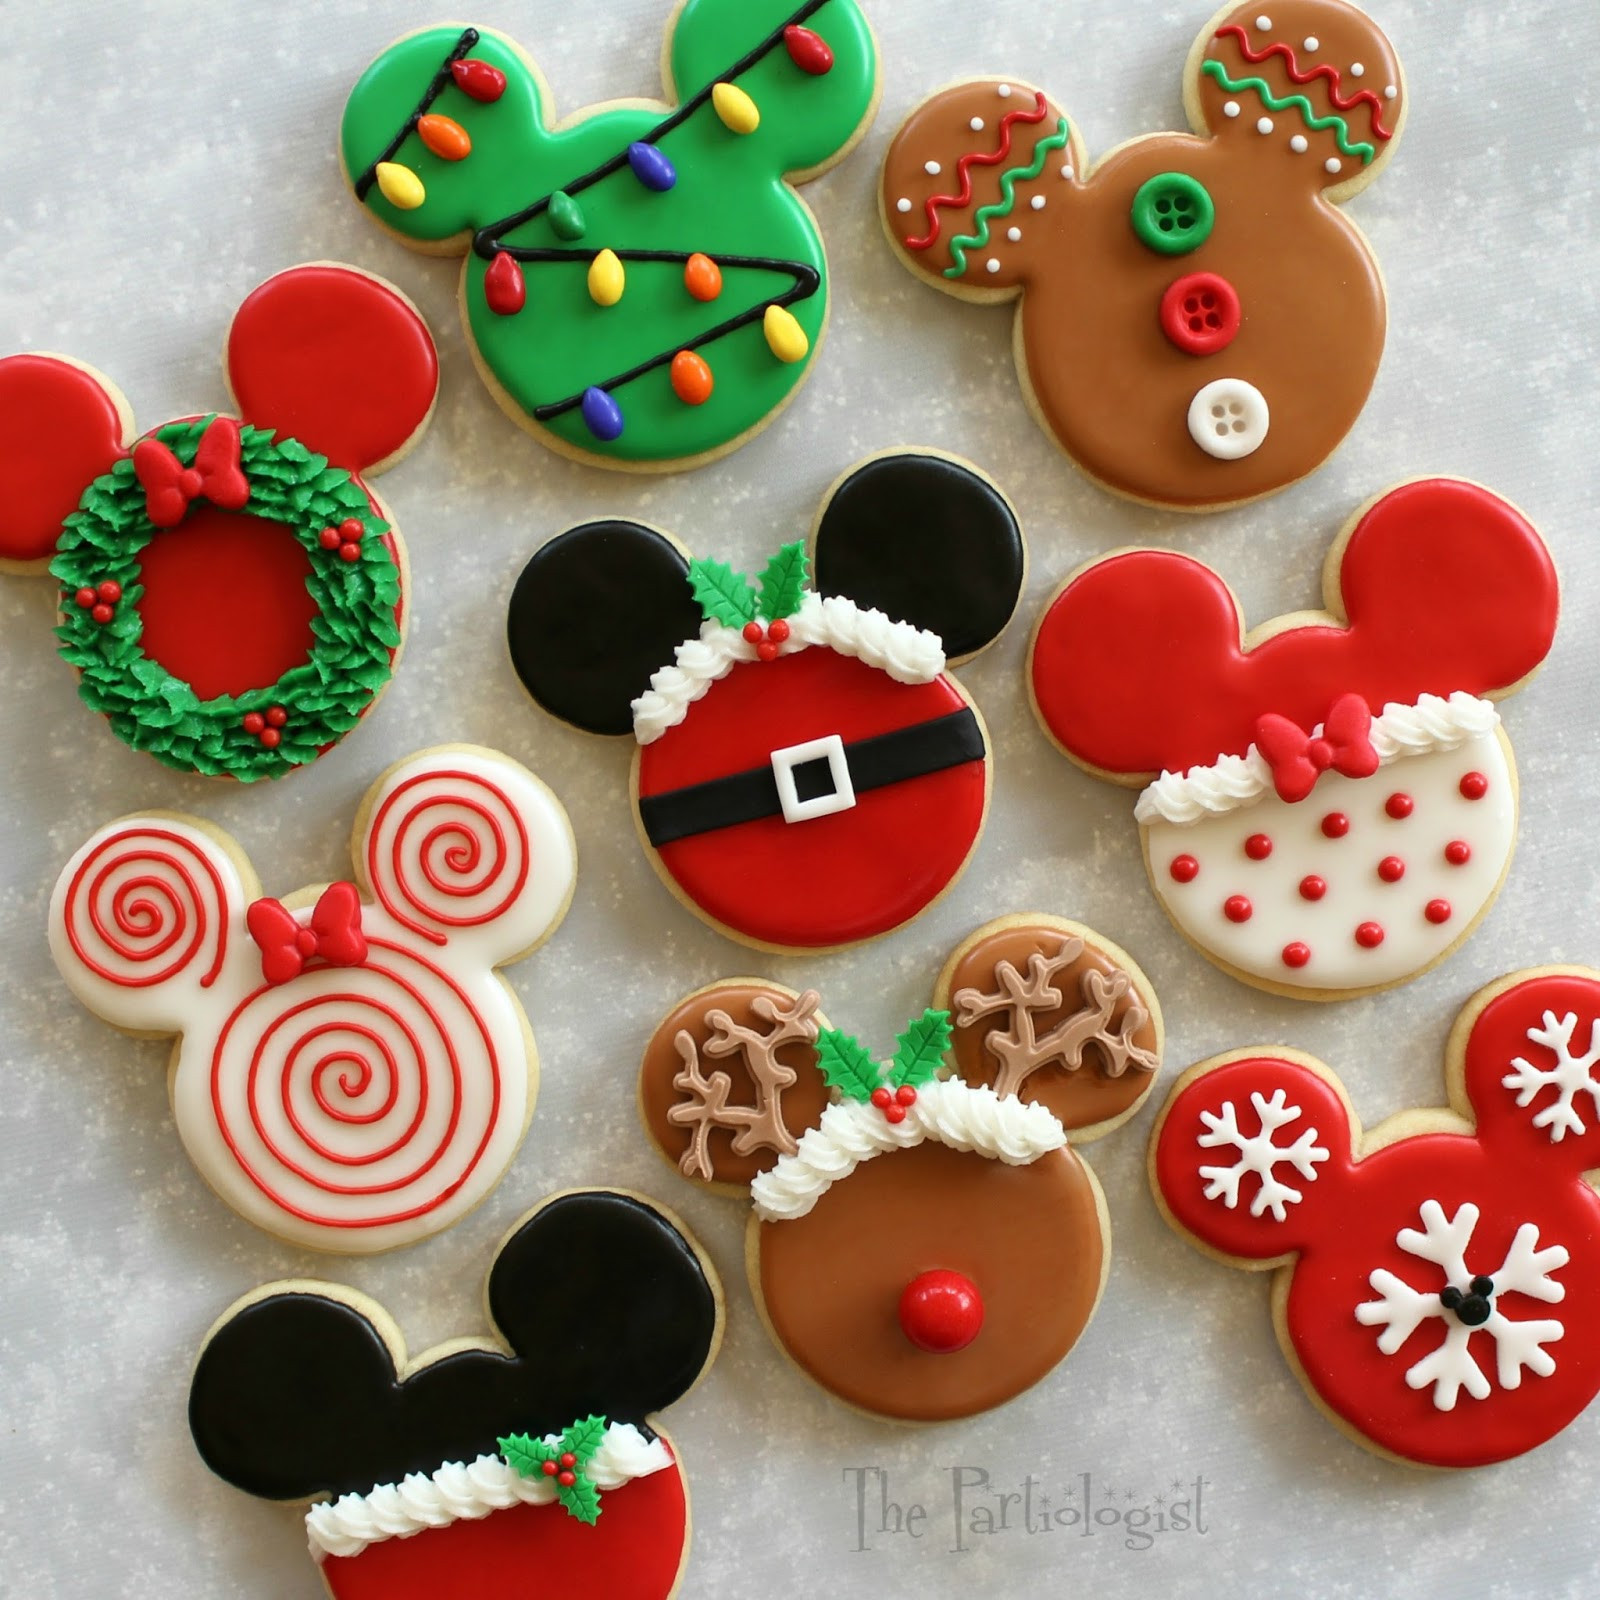 Christmas Mouse Cookies
 The Partiologist Disney Themed Christmas Cookies